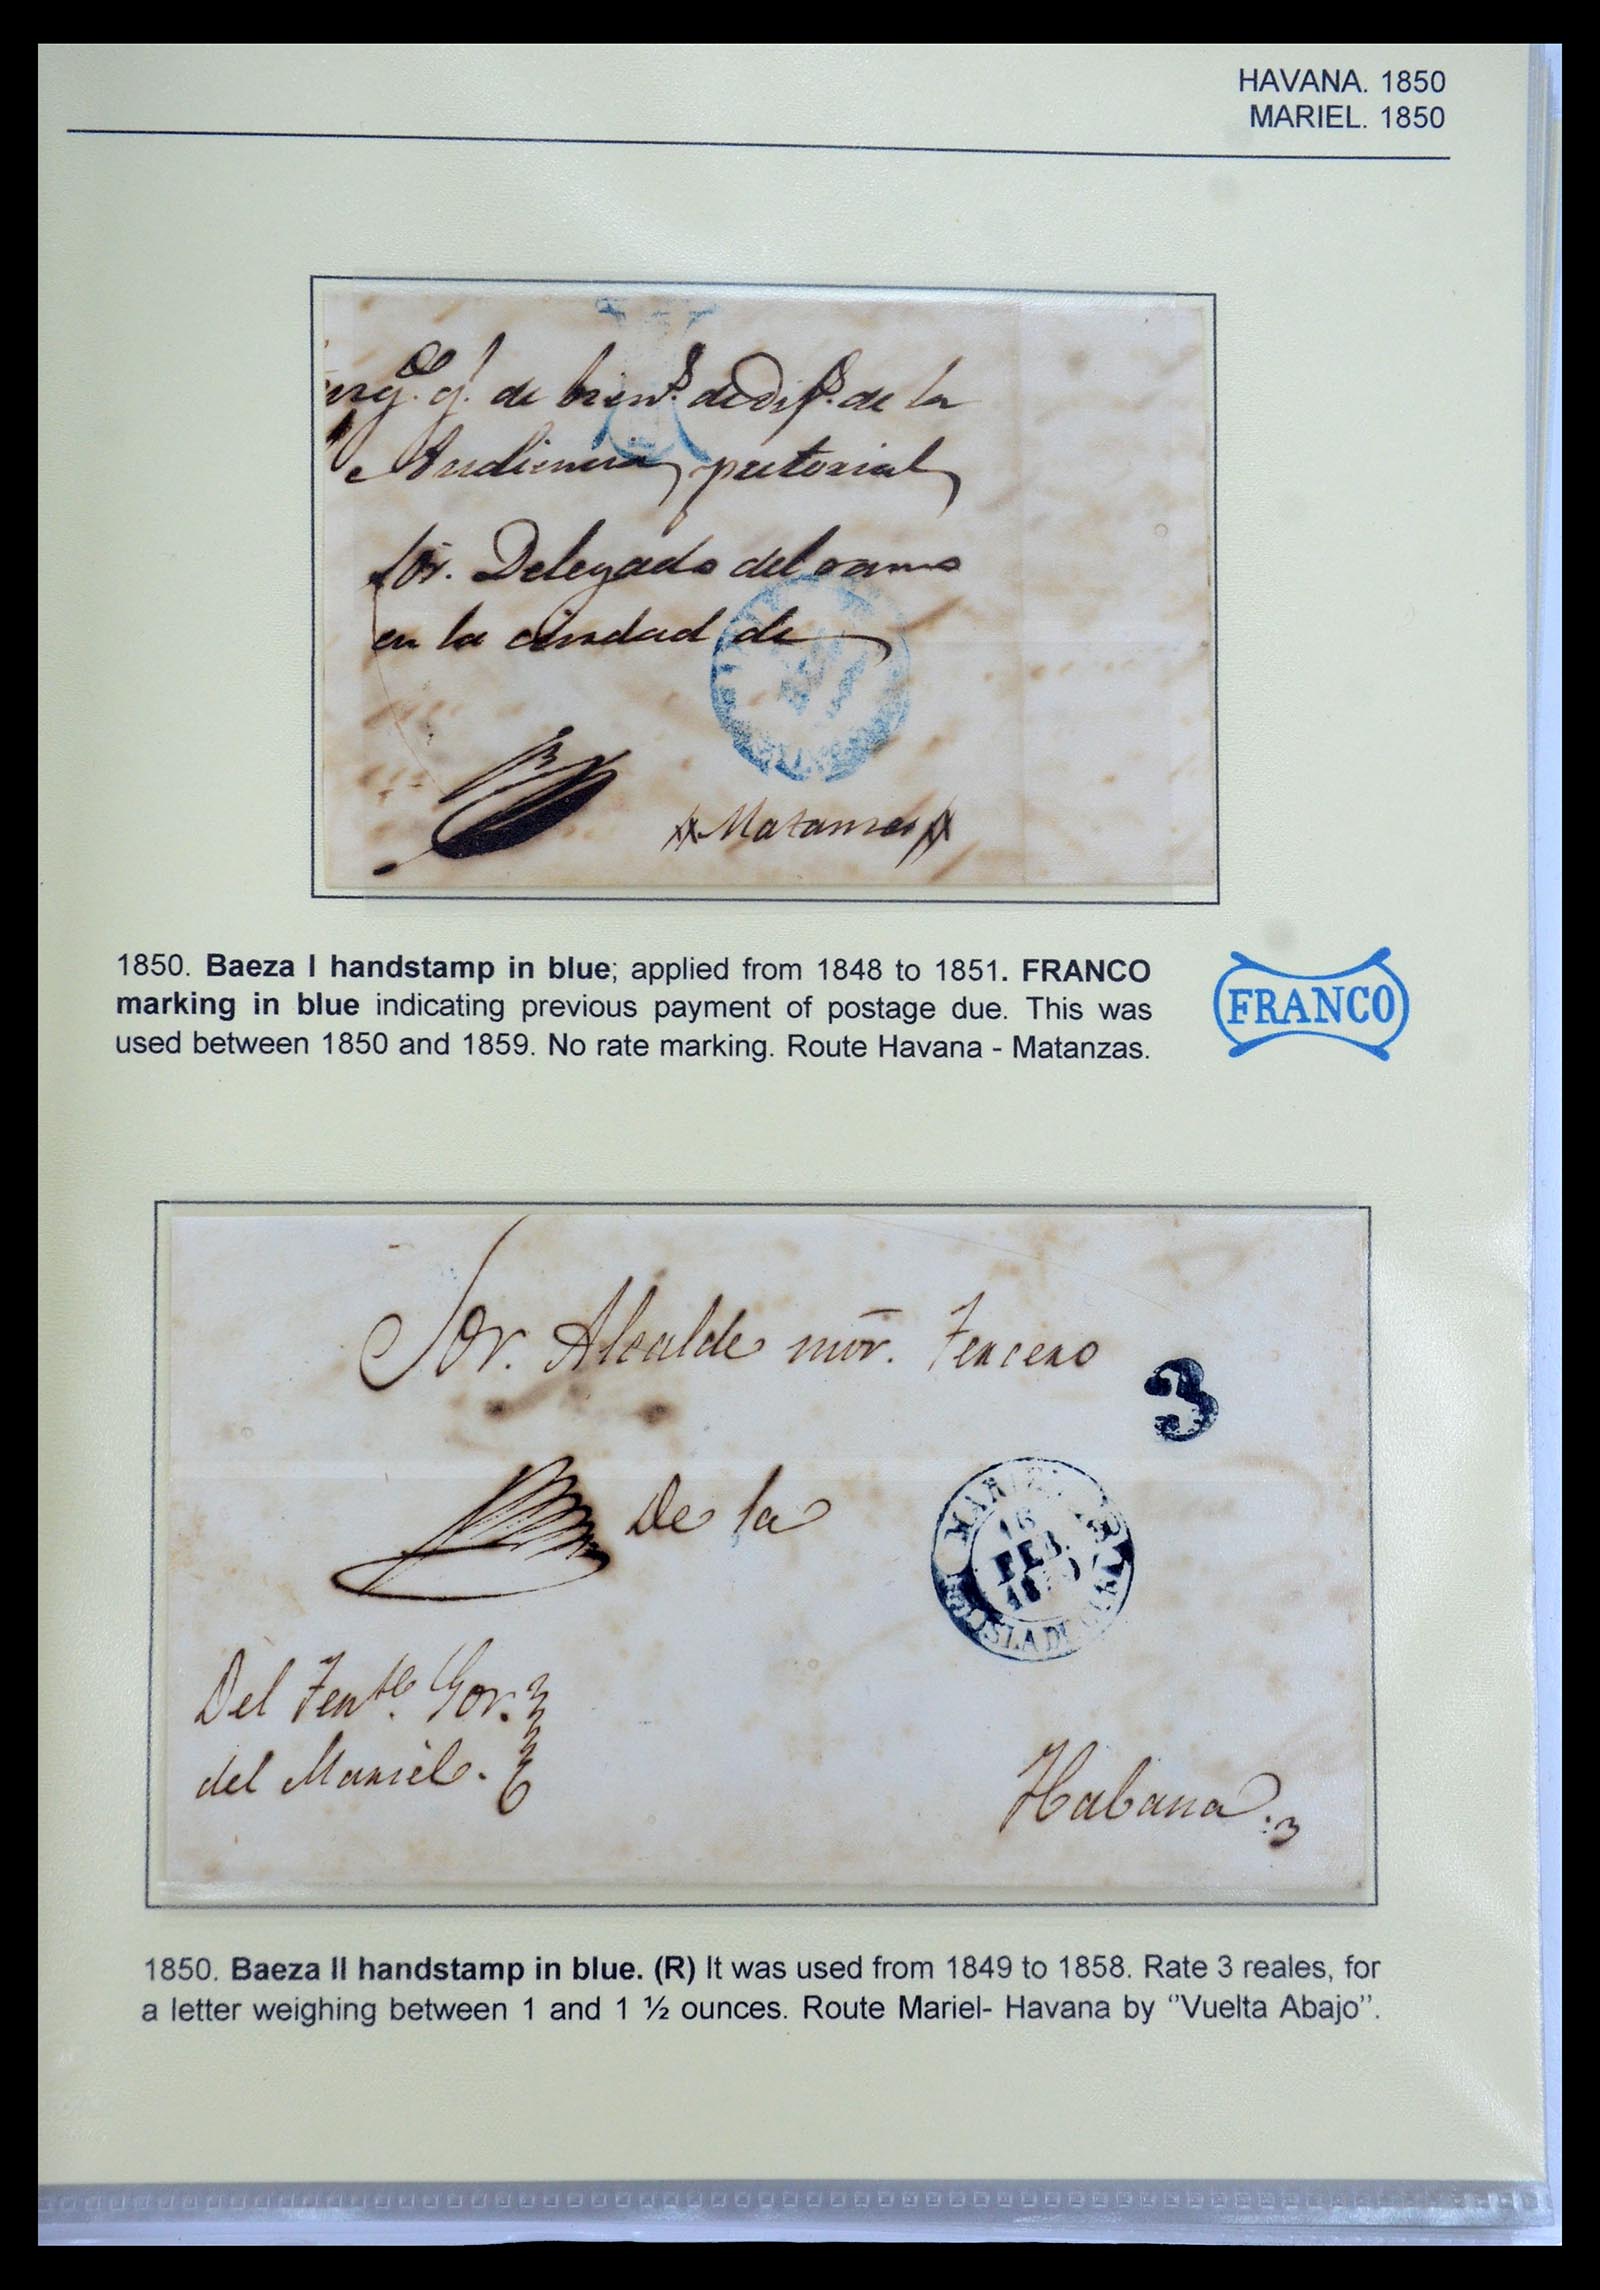 35551 021 - Stamp Collection 35551 Cuba covers 1820-1860.